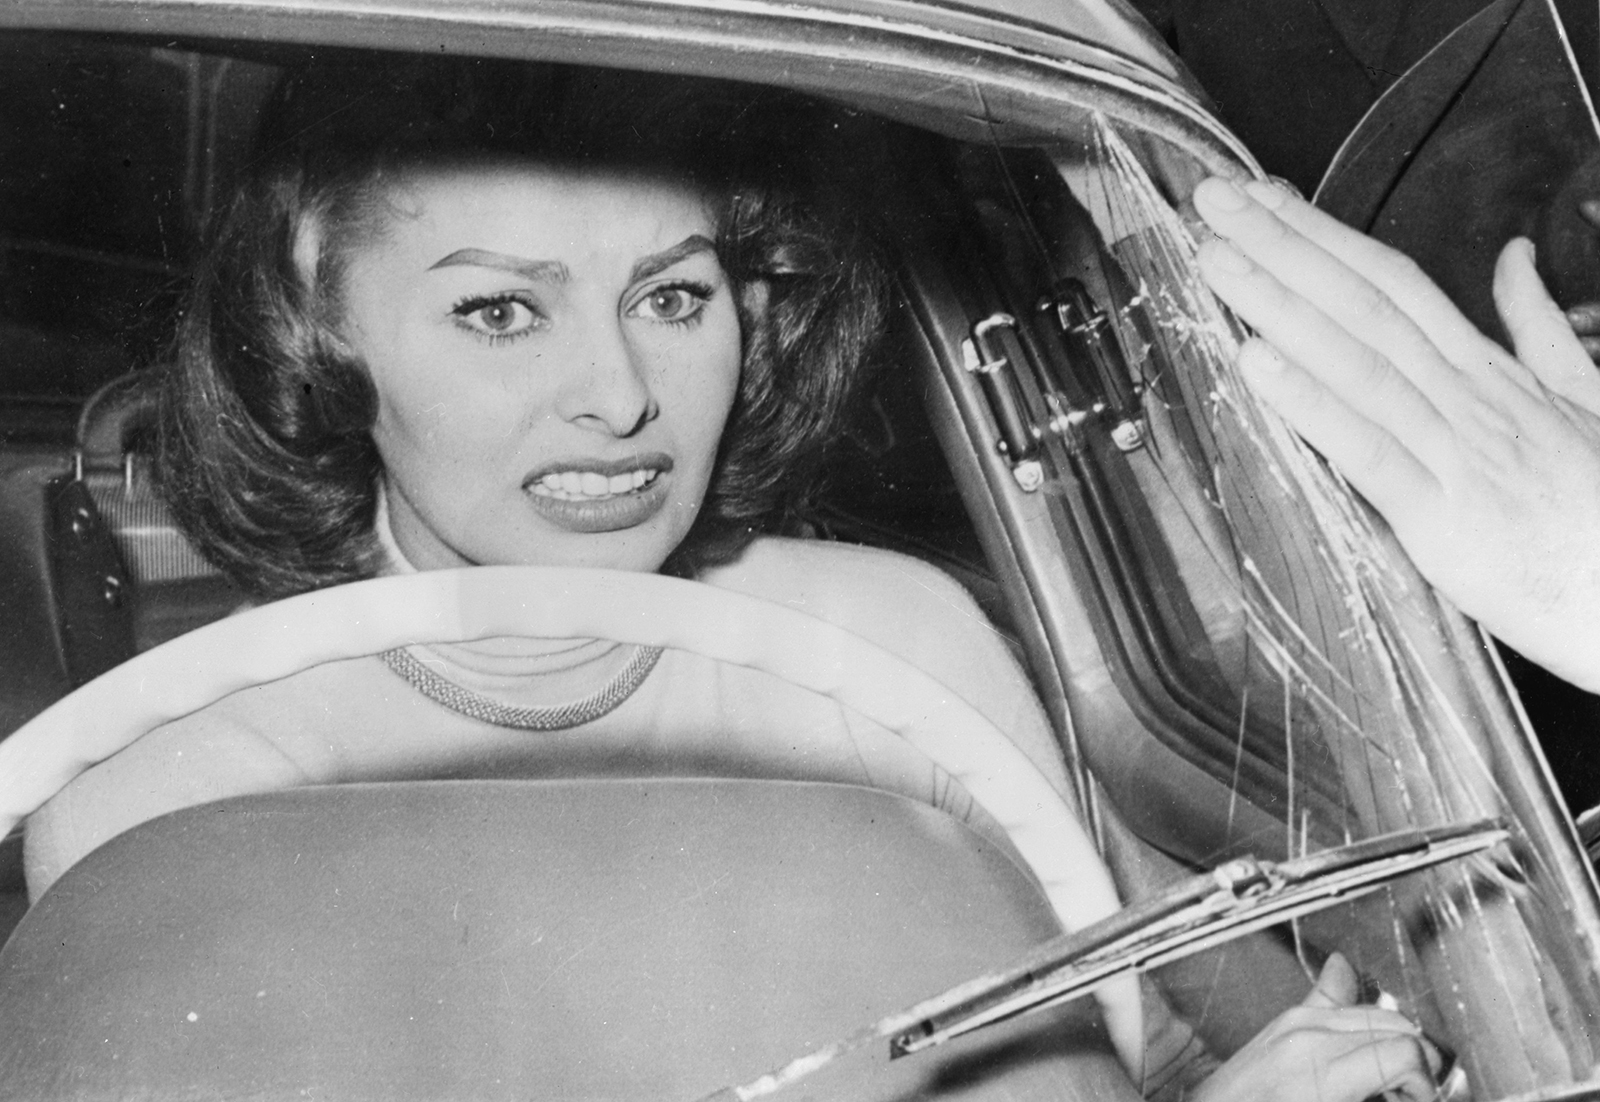 Sophia Loren cowers in her car as a crowd of fans press around her, smashing the windscreen in their eagerness to see her, April 9, 1956, Rome.